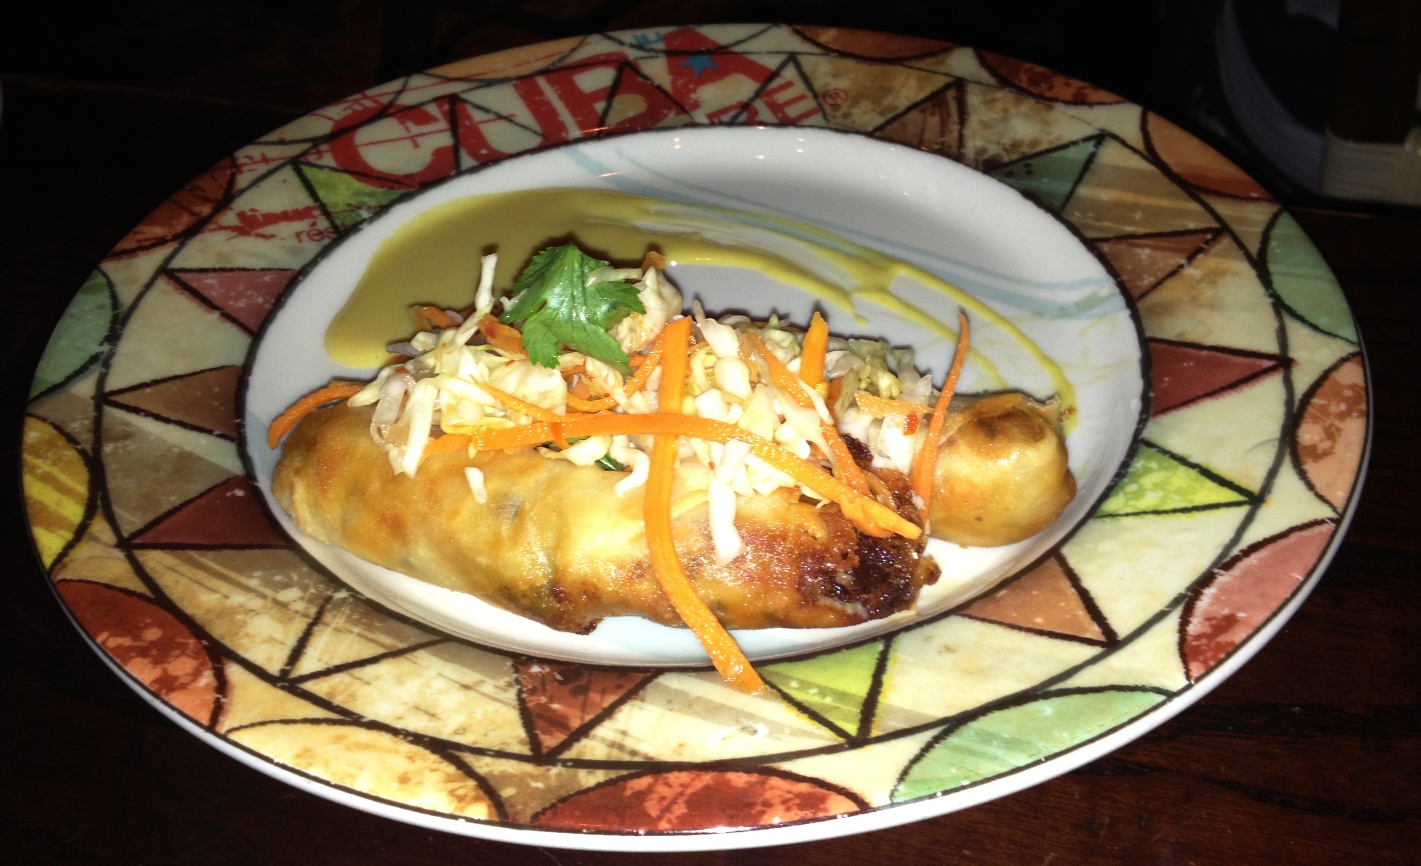 Bring Your Appetite to Tapas Tuesday at Cuba Libre in Washington, D.C